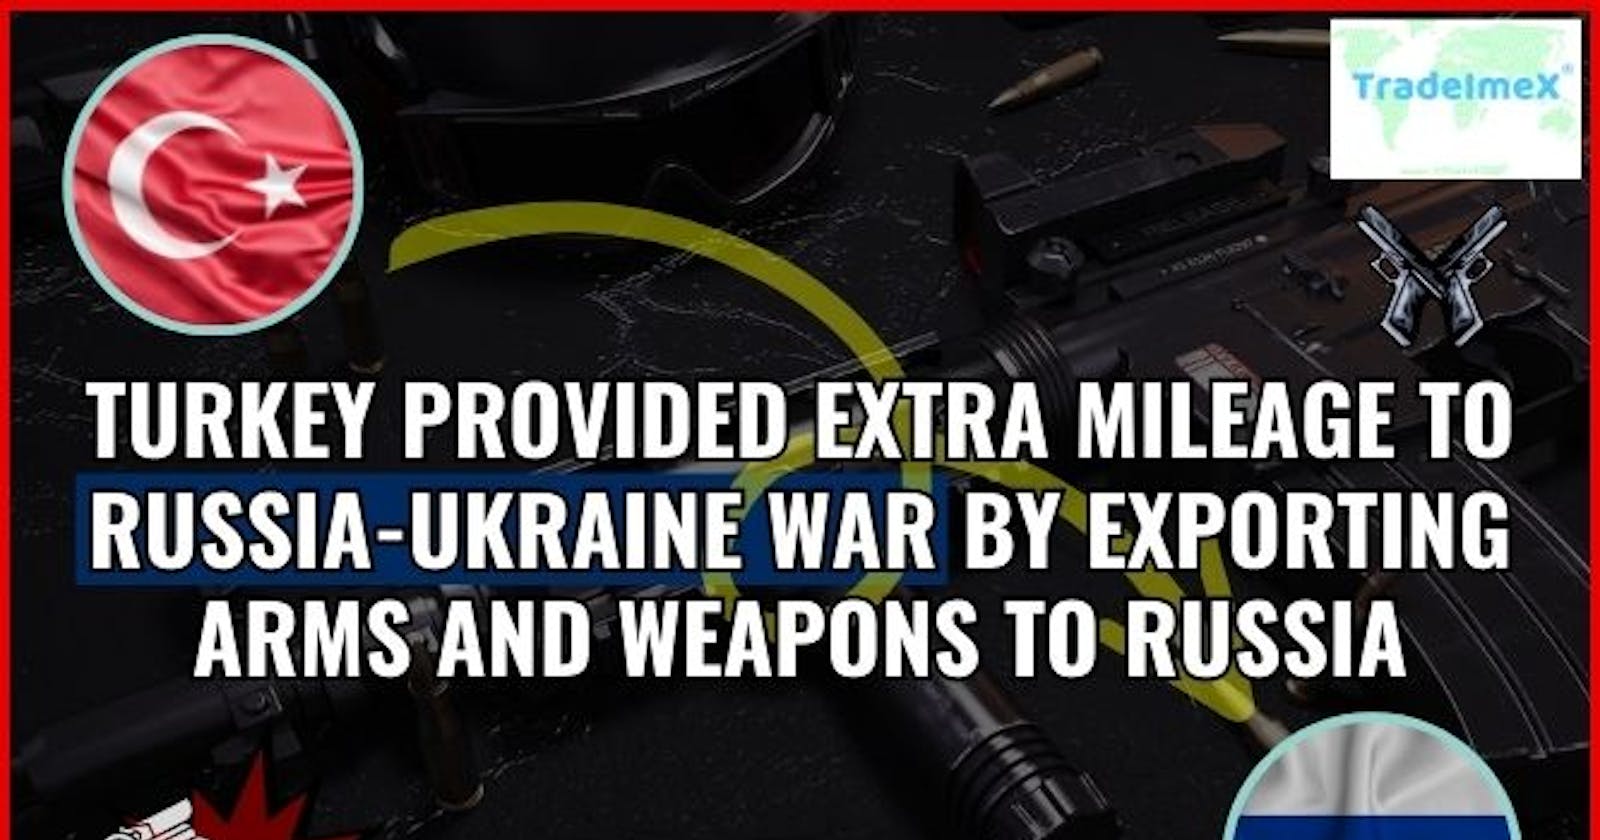 Turkey Is Providing Mileage To Russia-ukraine War By Exporting Arms And Weapons To Russia